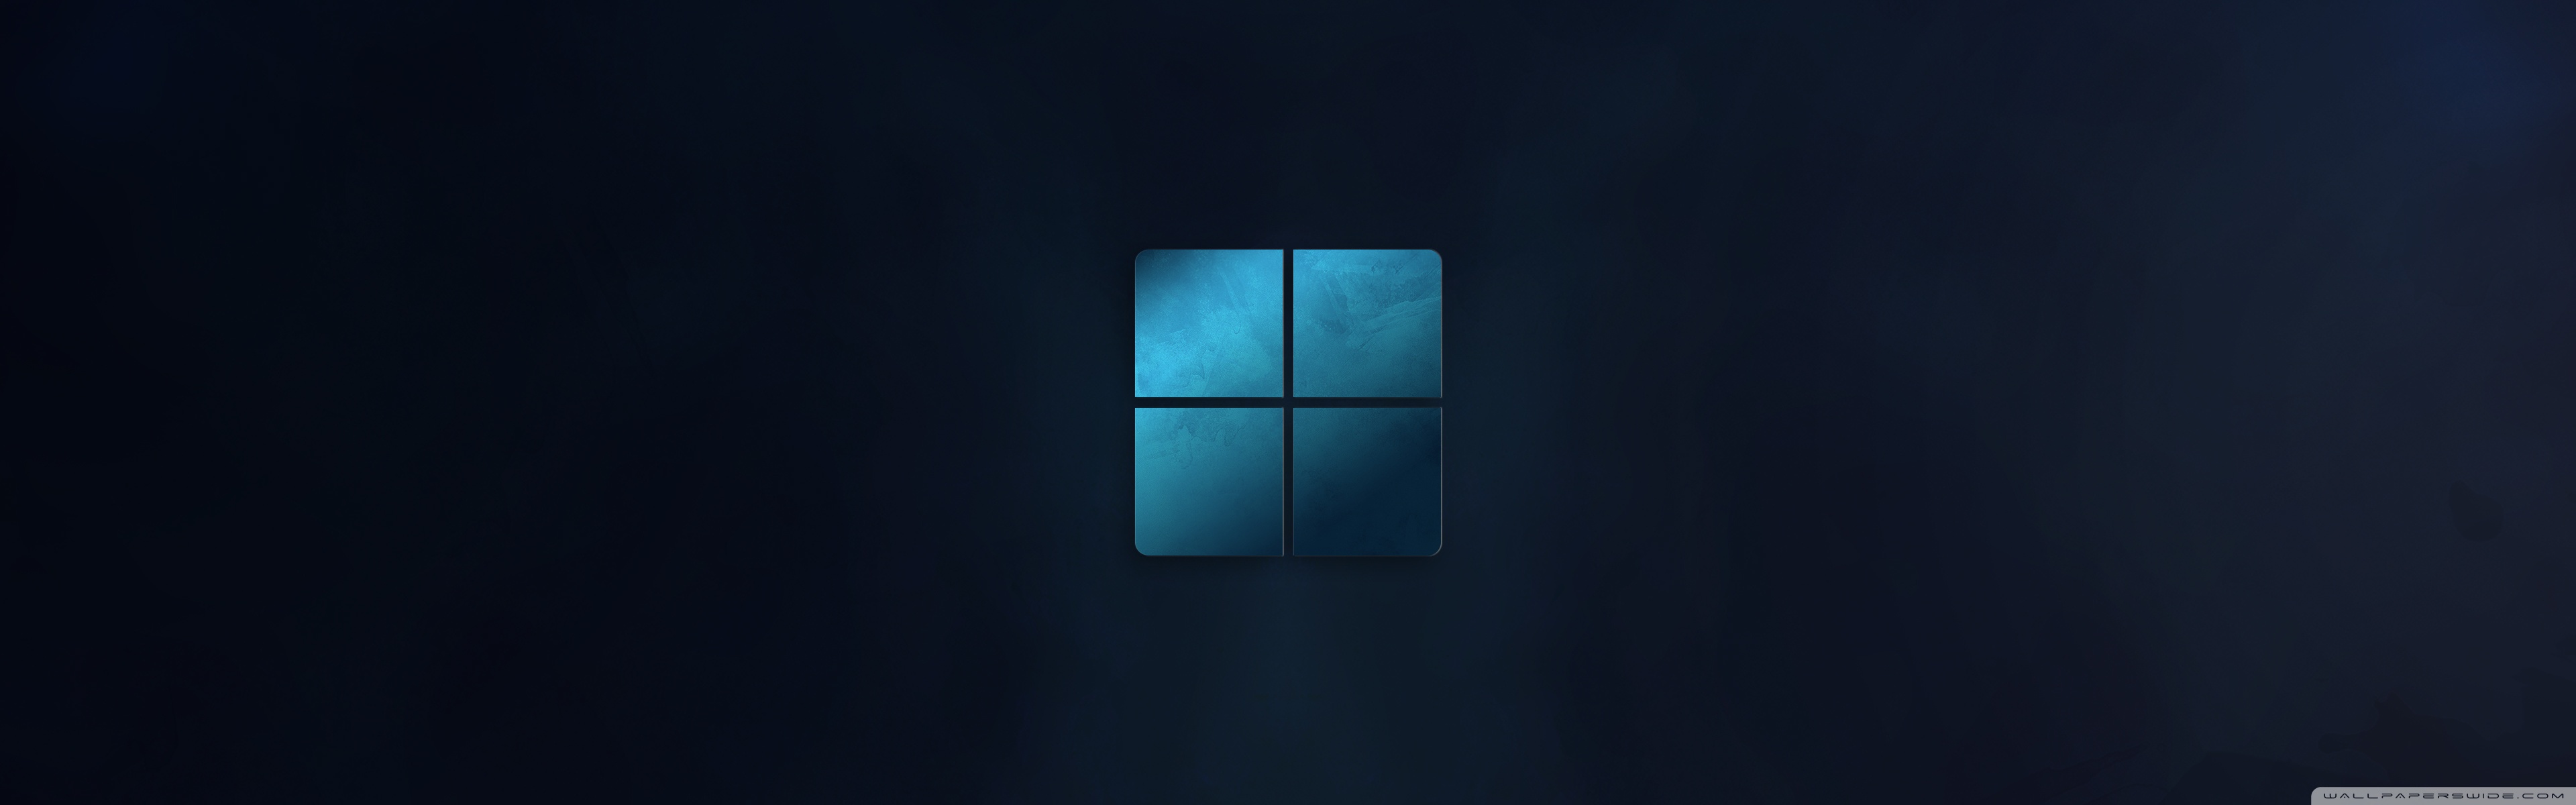 Windows 11 4k Glowing Wallpaper, HD Artist 4K Wallpapers, Images and  Background - Wallpapers Den